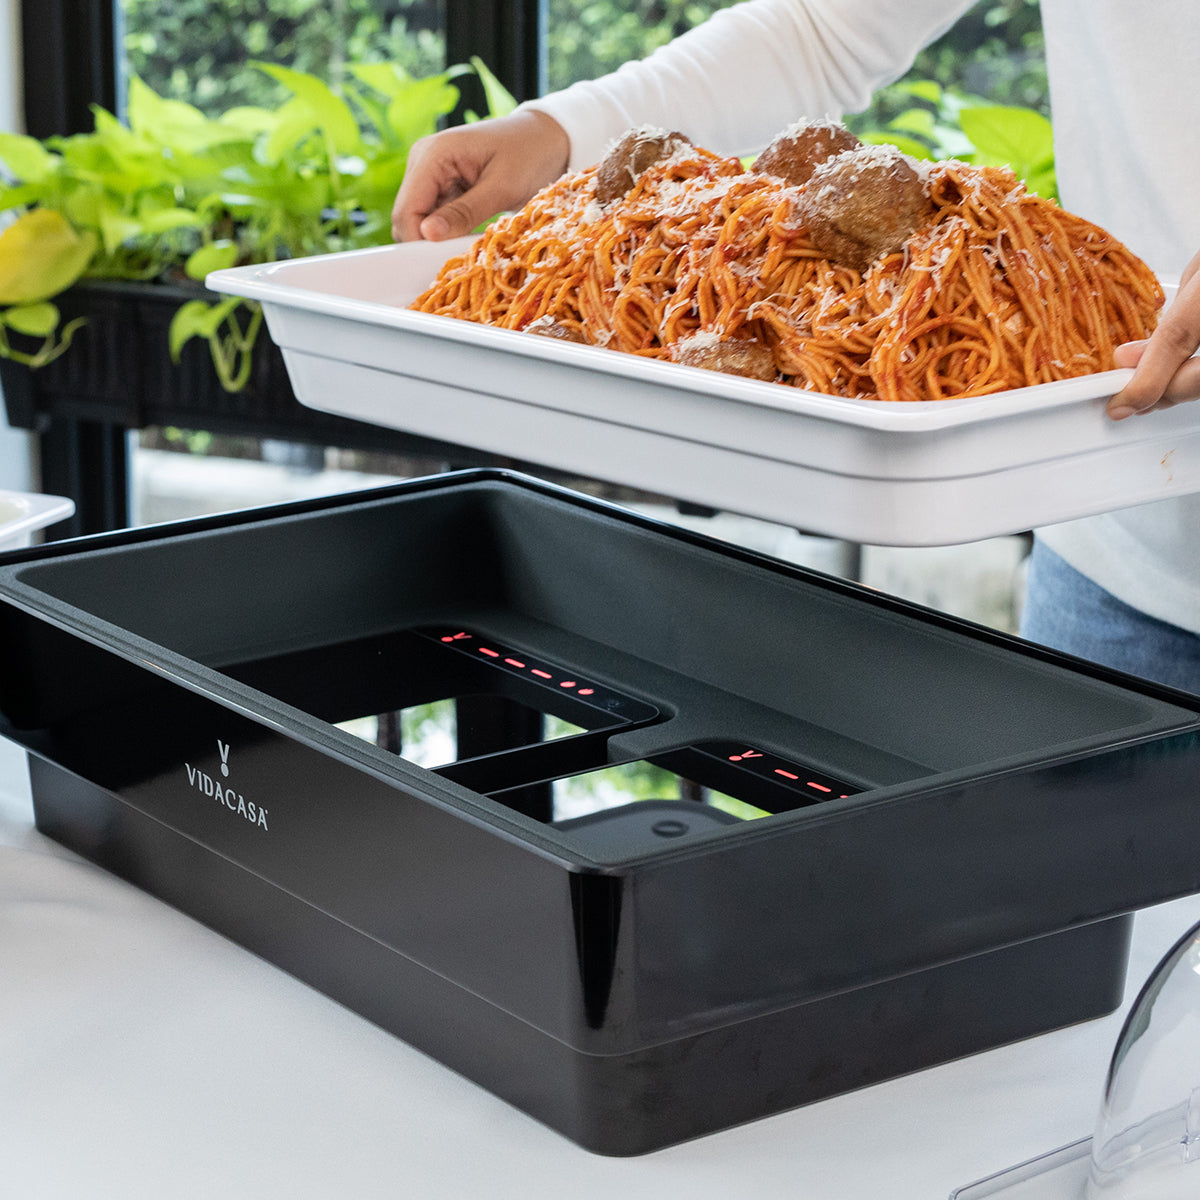 Today's most versatile gastronorm sizing buffetware equipment that can keep cold foods fresh at 4ºC (39ºF) without wet ice, or cooked gourmet hot at 80ºC (176ºF) without dangling cords or chafing fuels. 